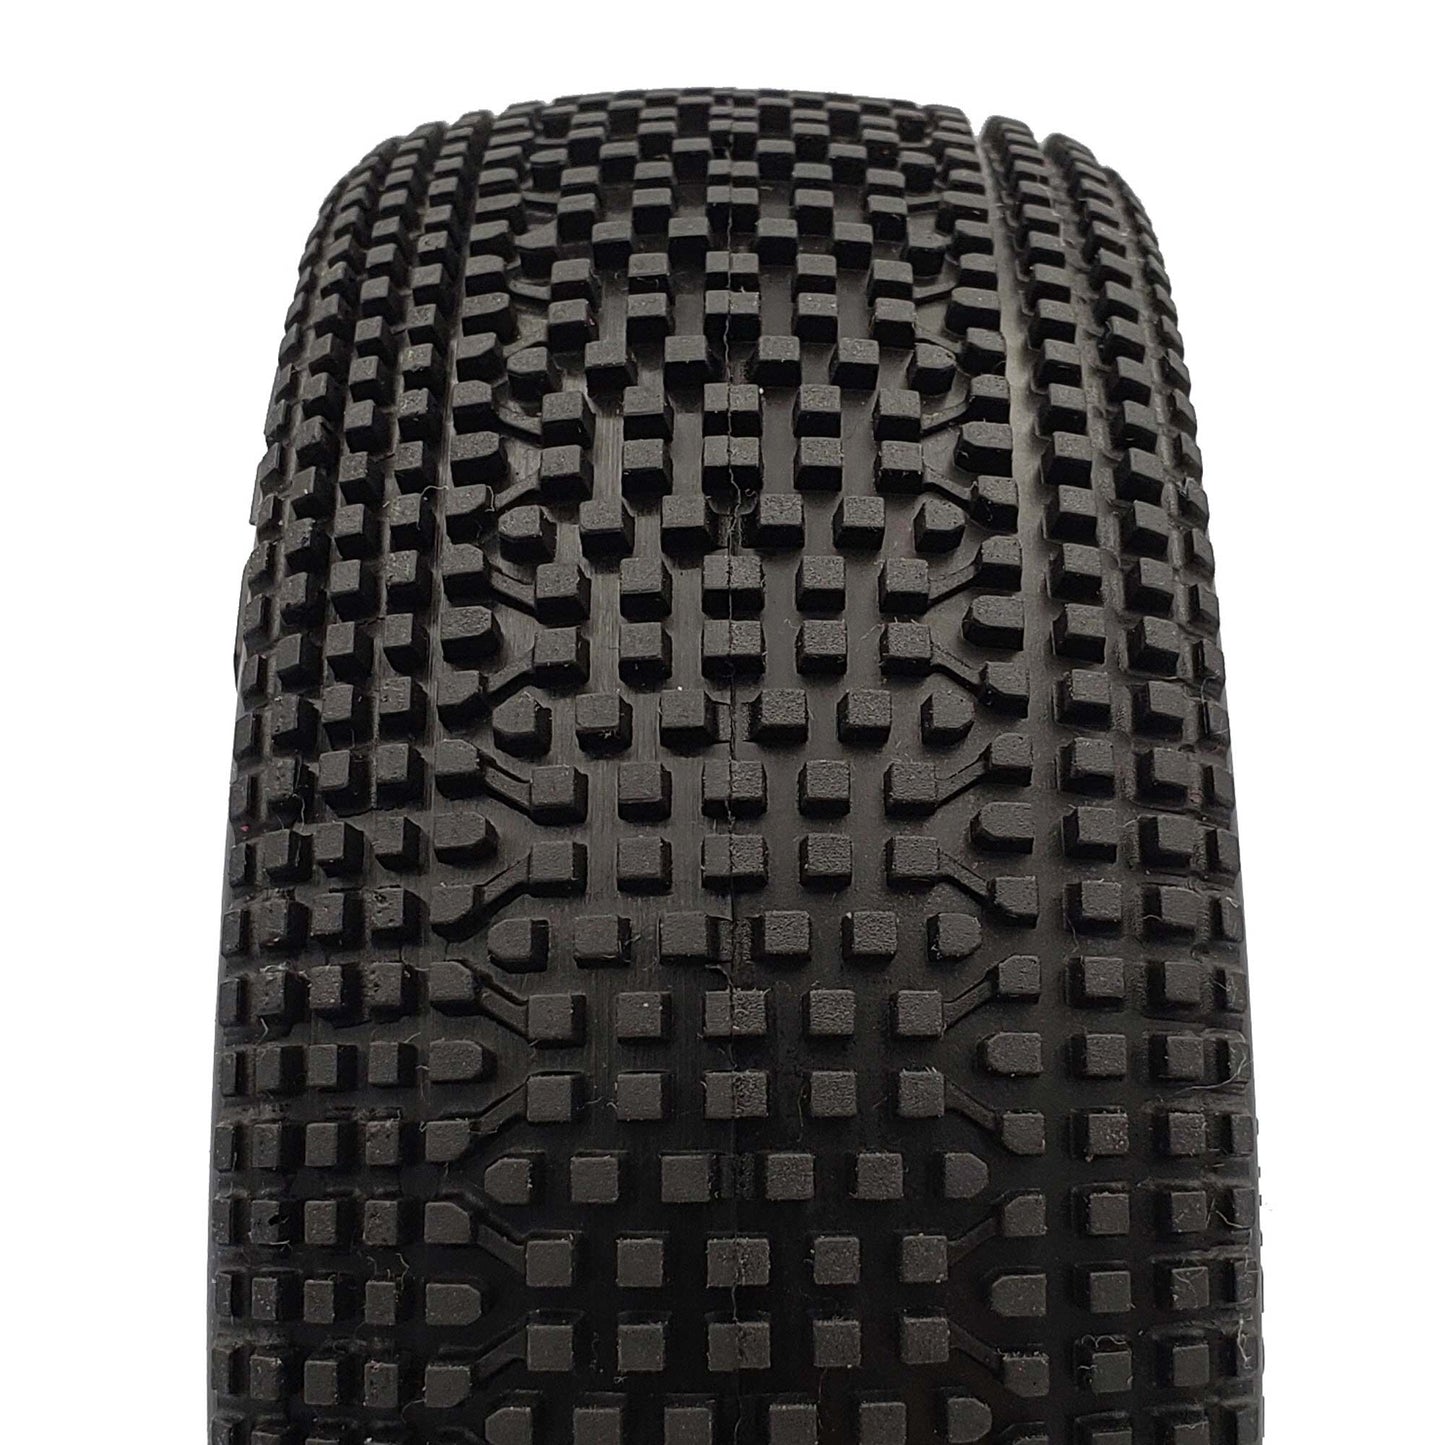 1/8 2AB Medium Long Wear Tires, Red Inserts( 2): Buggy - Dirt Cheap RC SAVING YOU MONEY, ONE PART AT A TIME